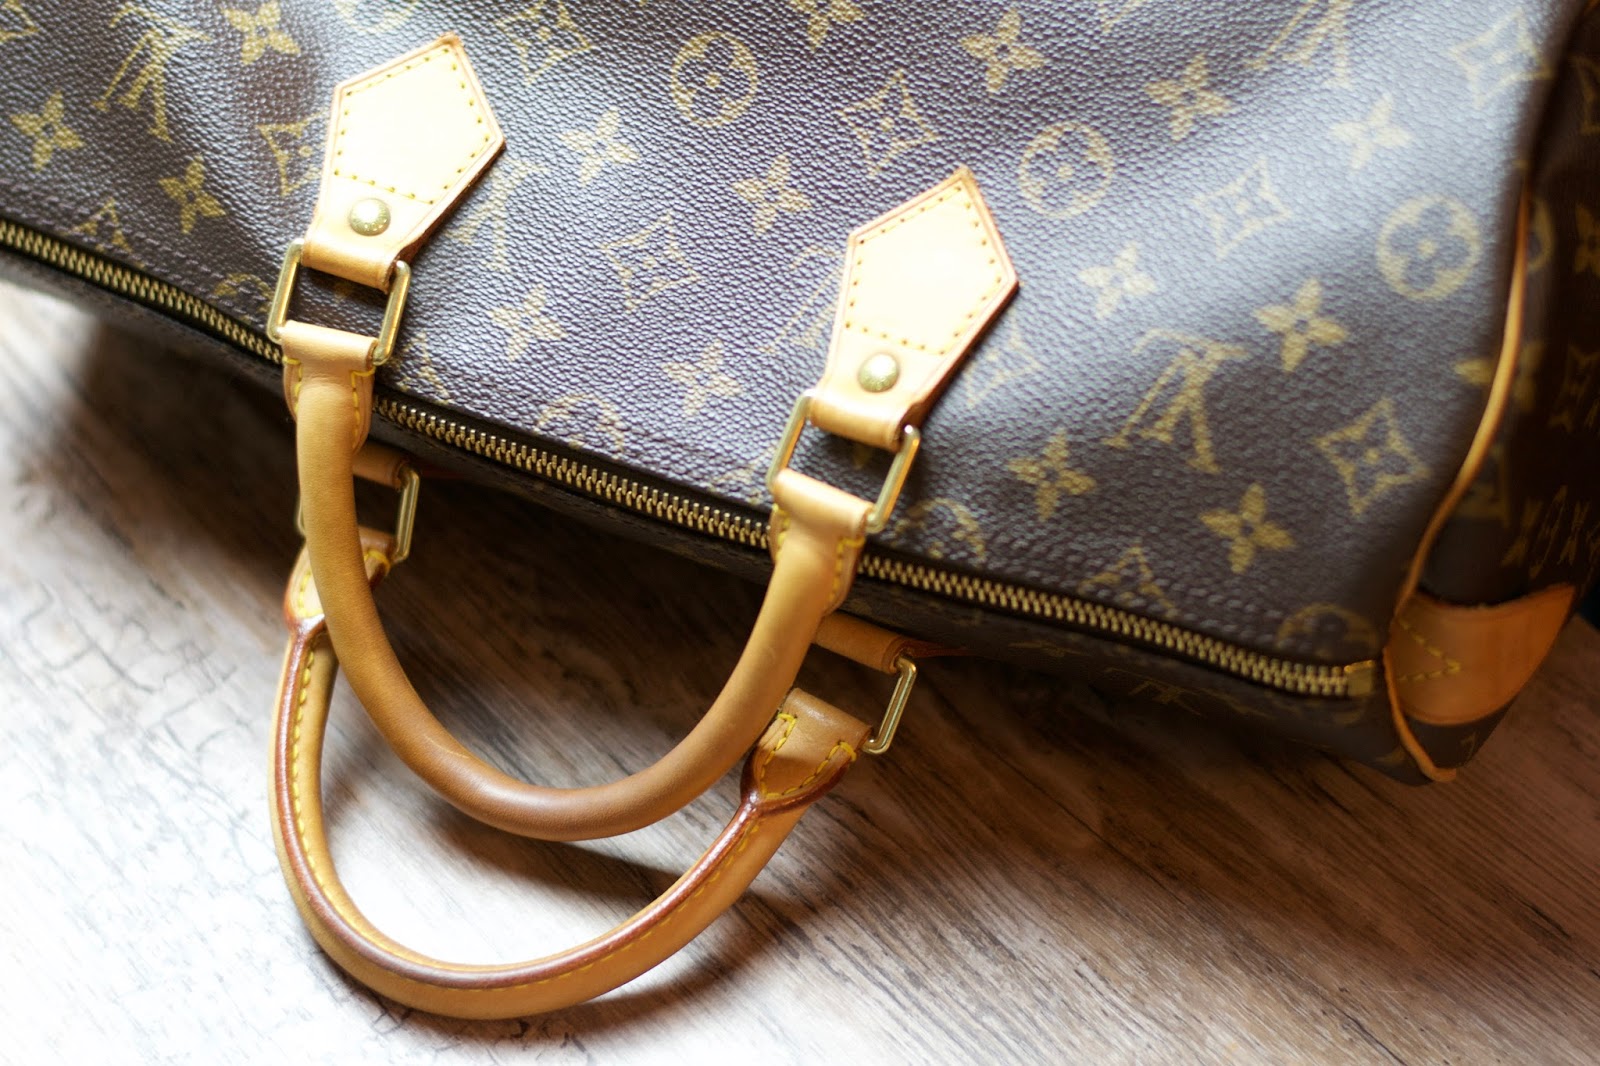 What's in my bag, Louis Vuitton